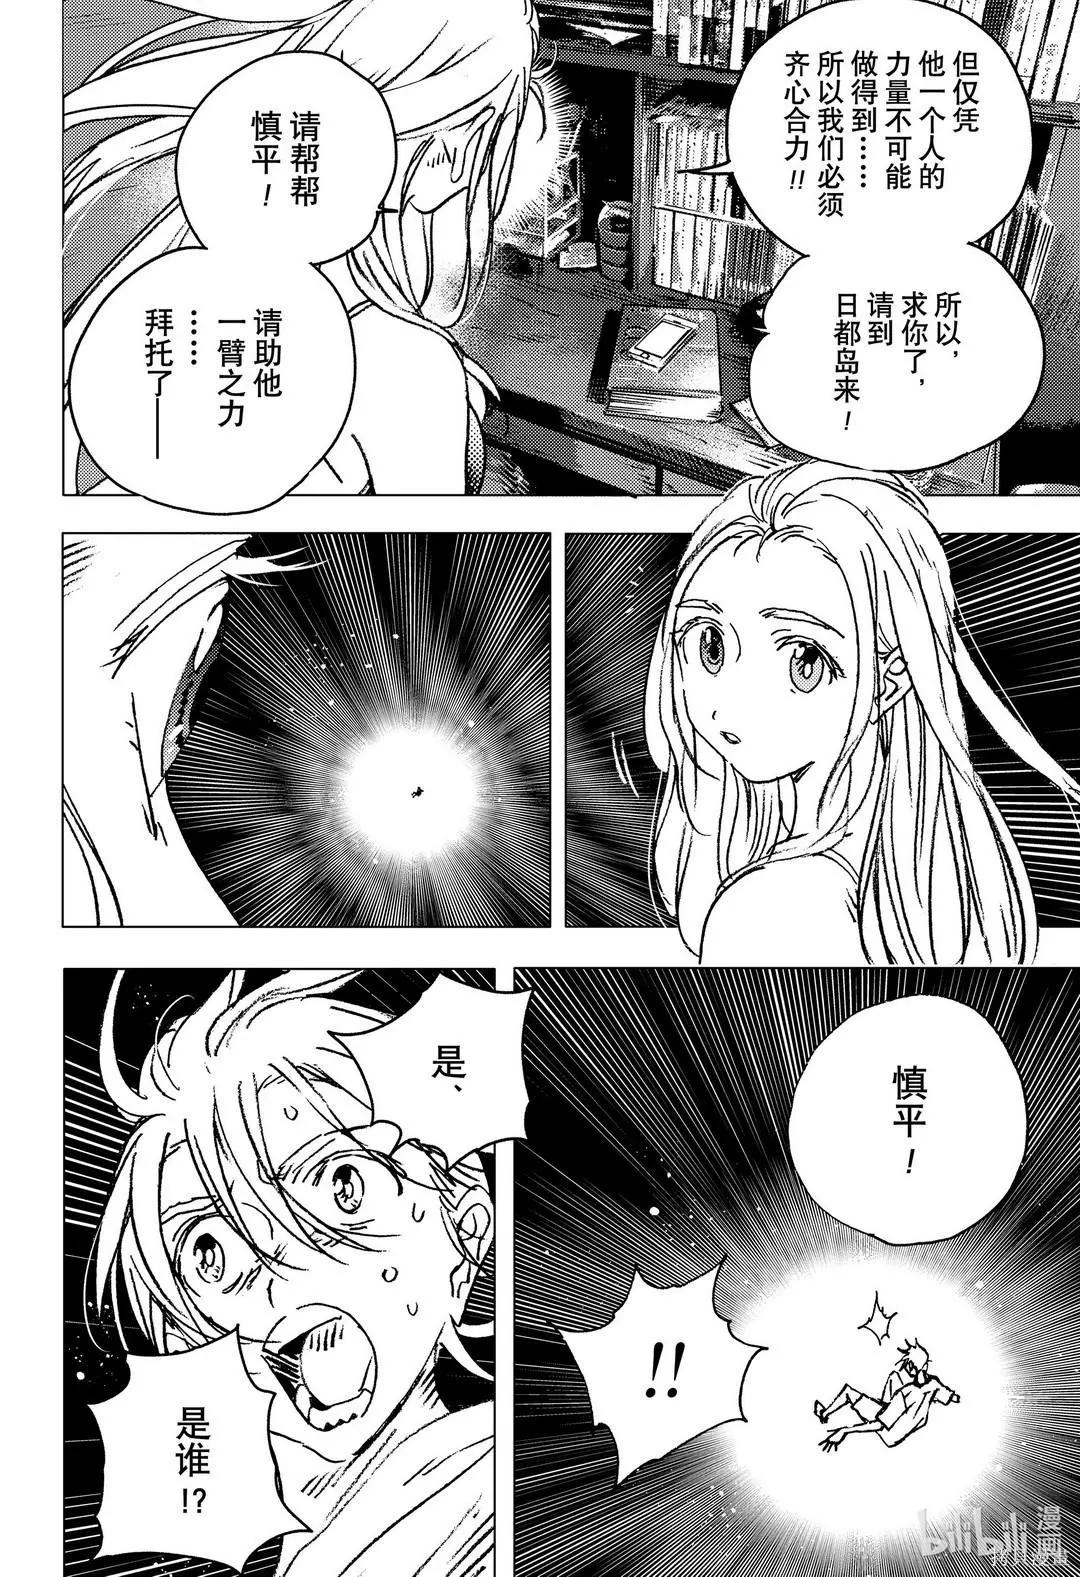 Summer time rendering - 第138話 - 6